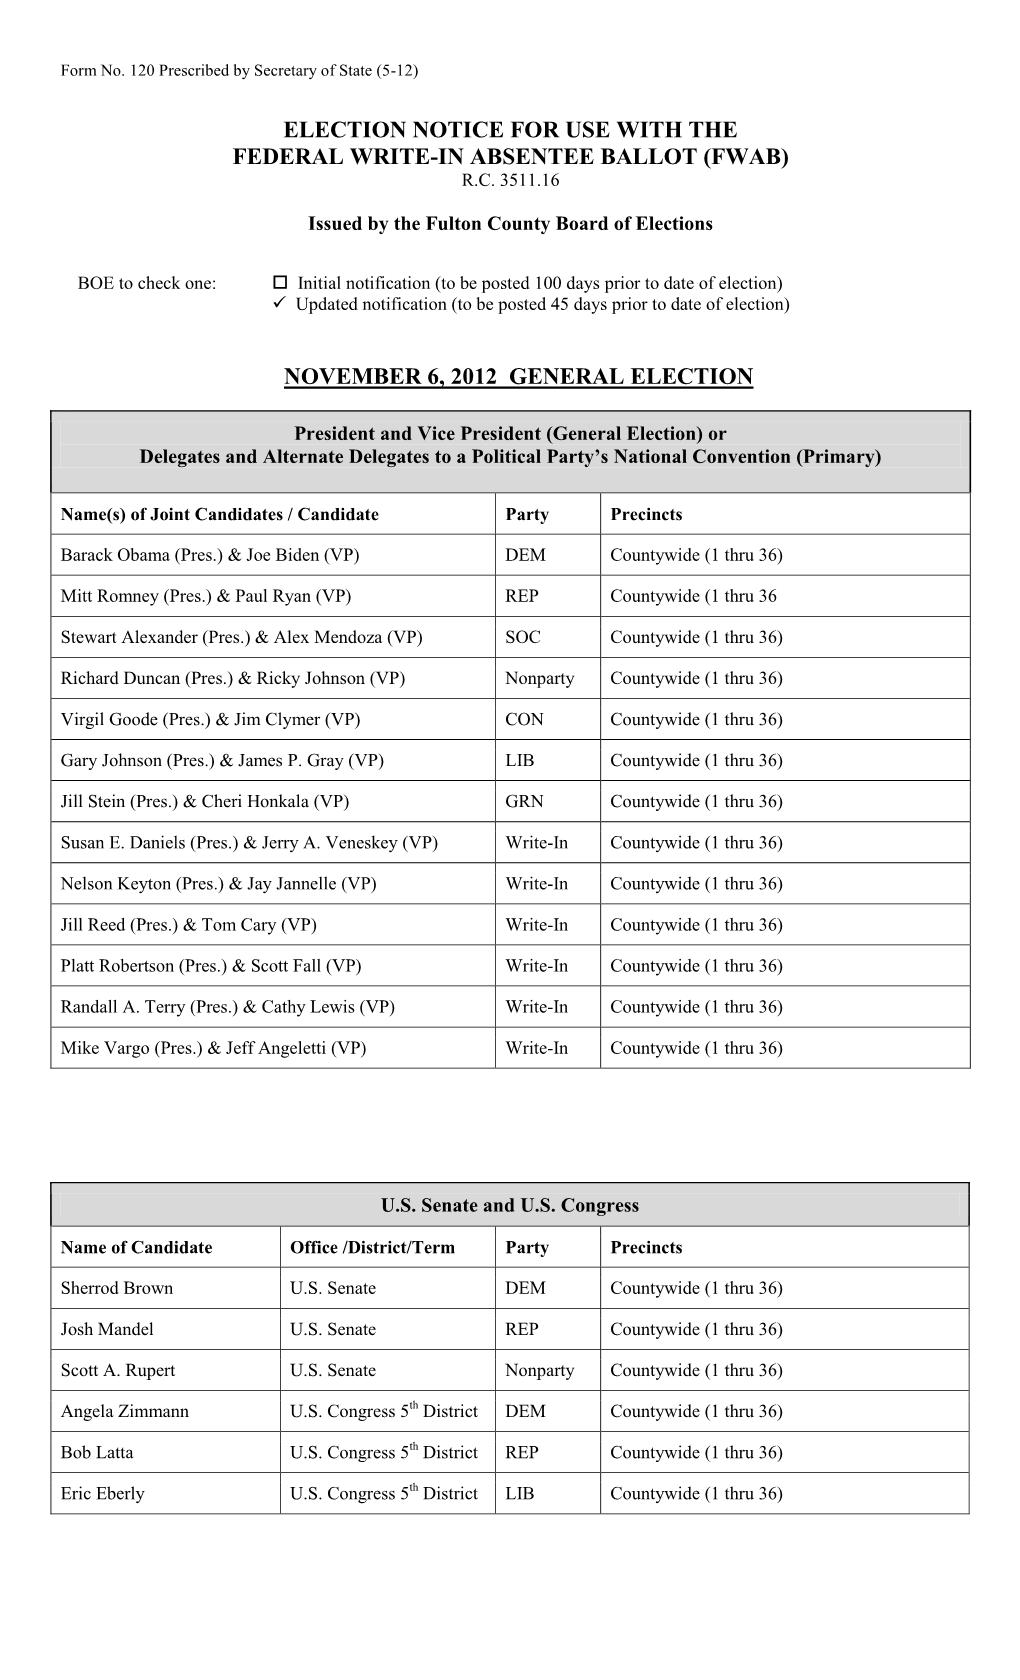 Election Notice for Use with the Federal Write-In Absentee Ballot (Fwab) R.C